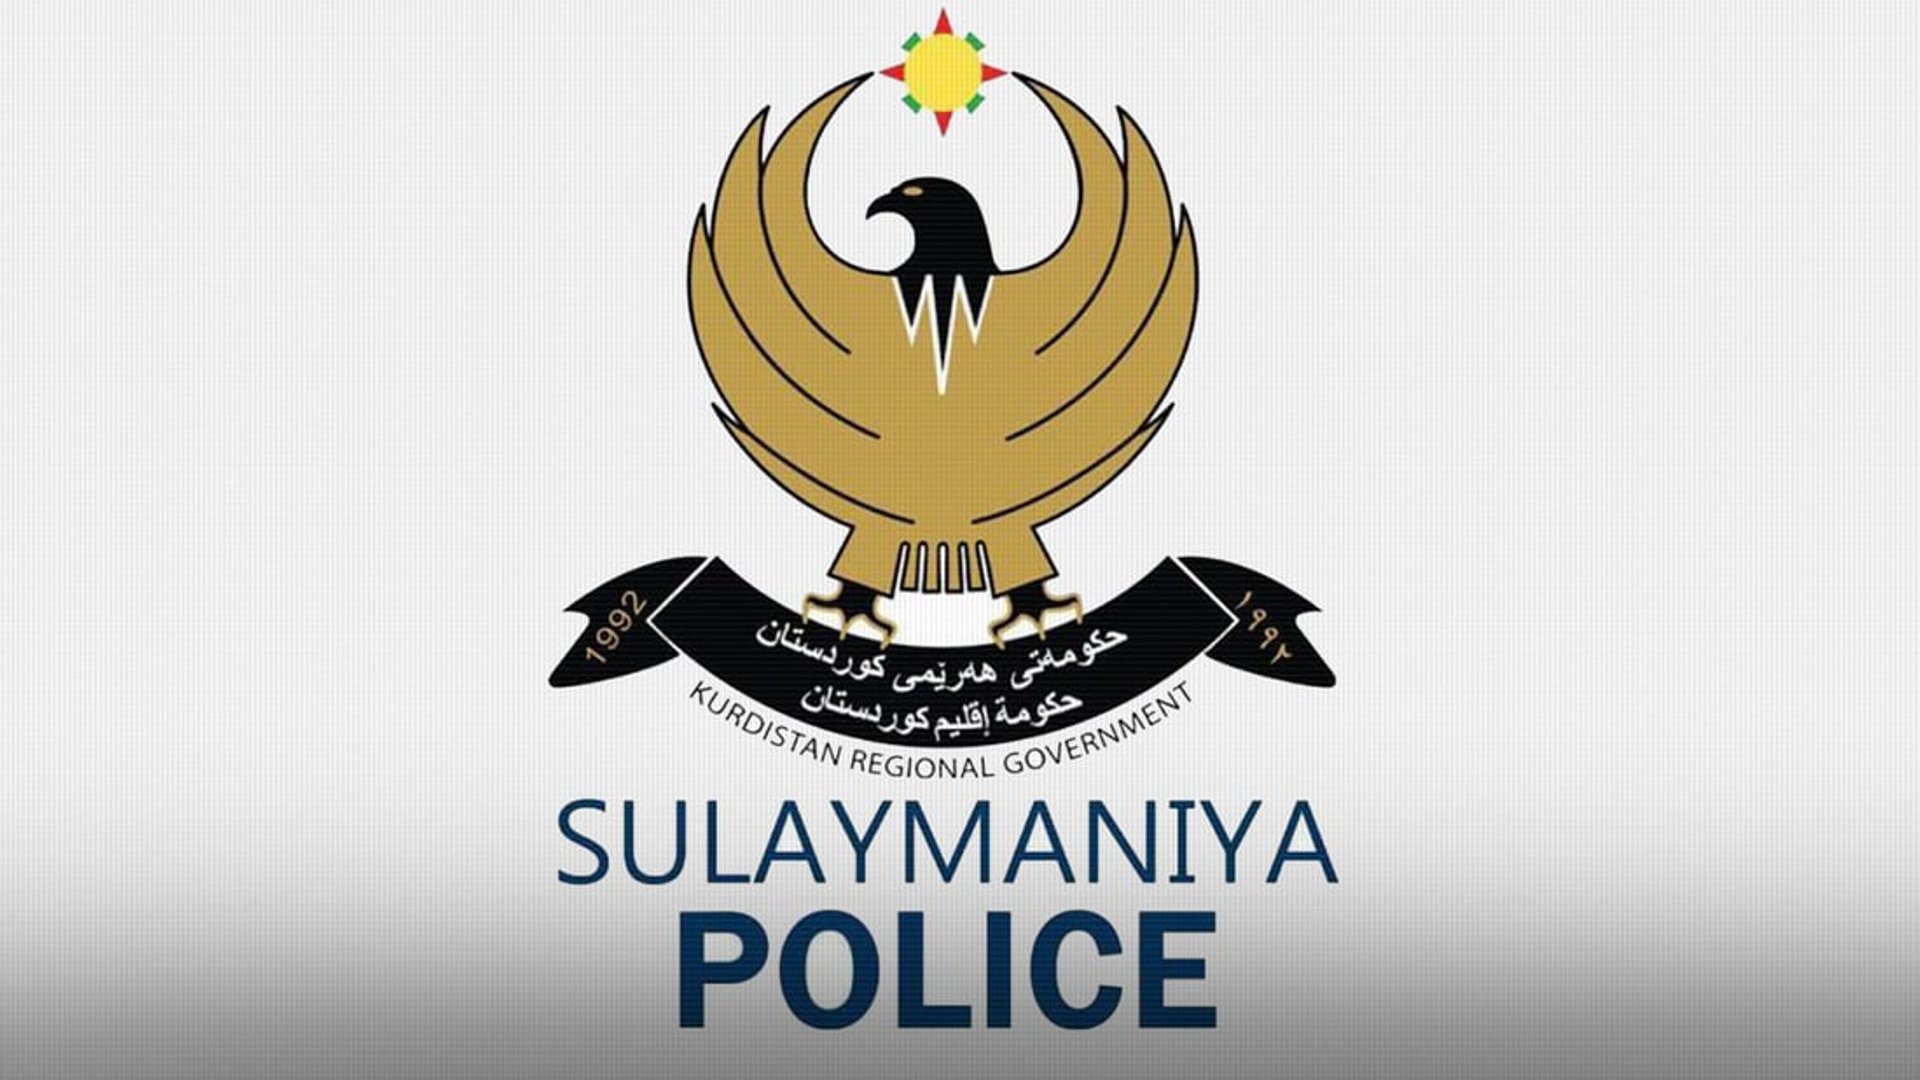 Sulaymaniyah to establish a museum dedicated to the citys police force